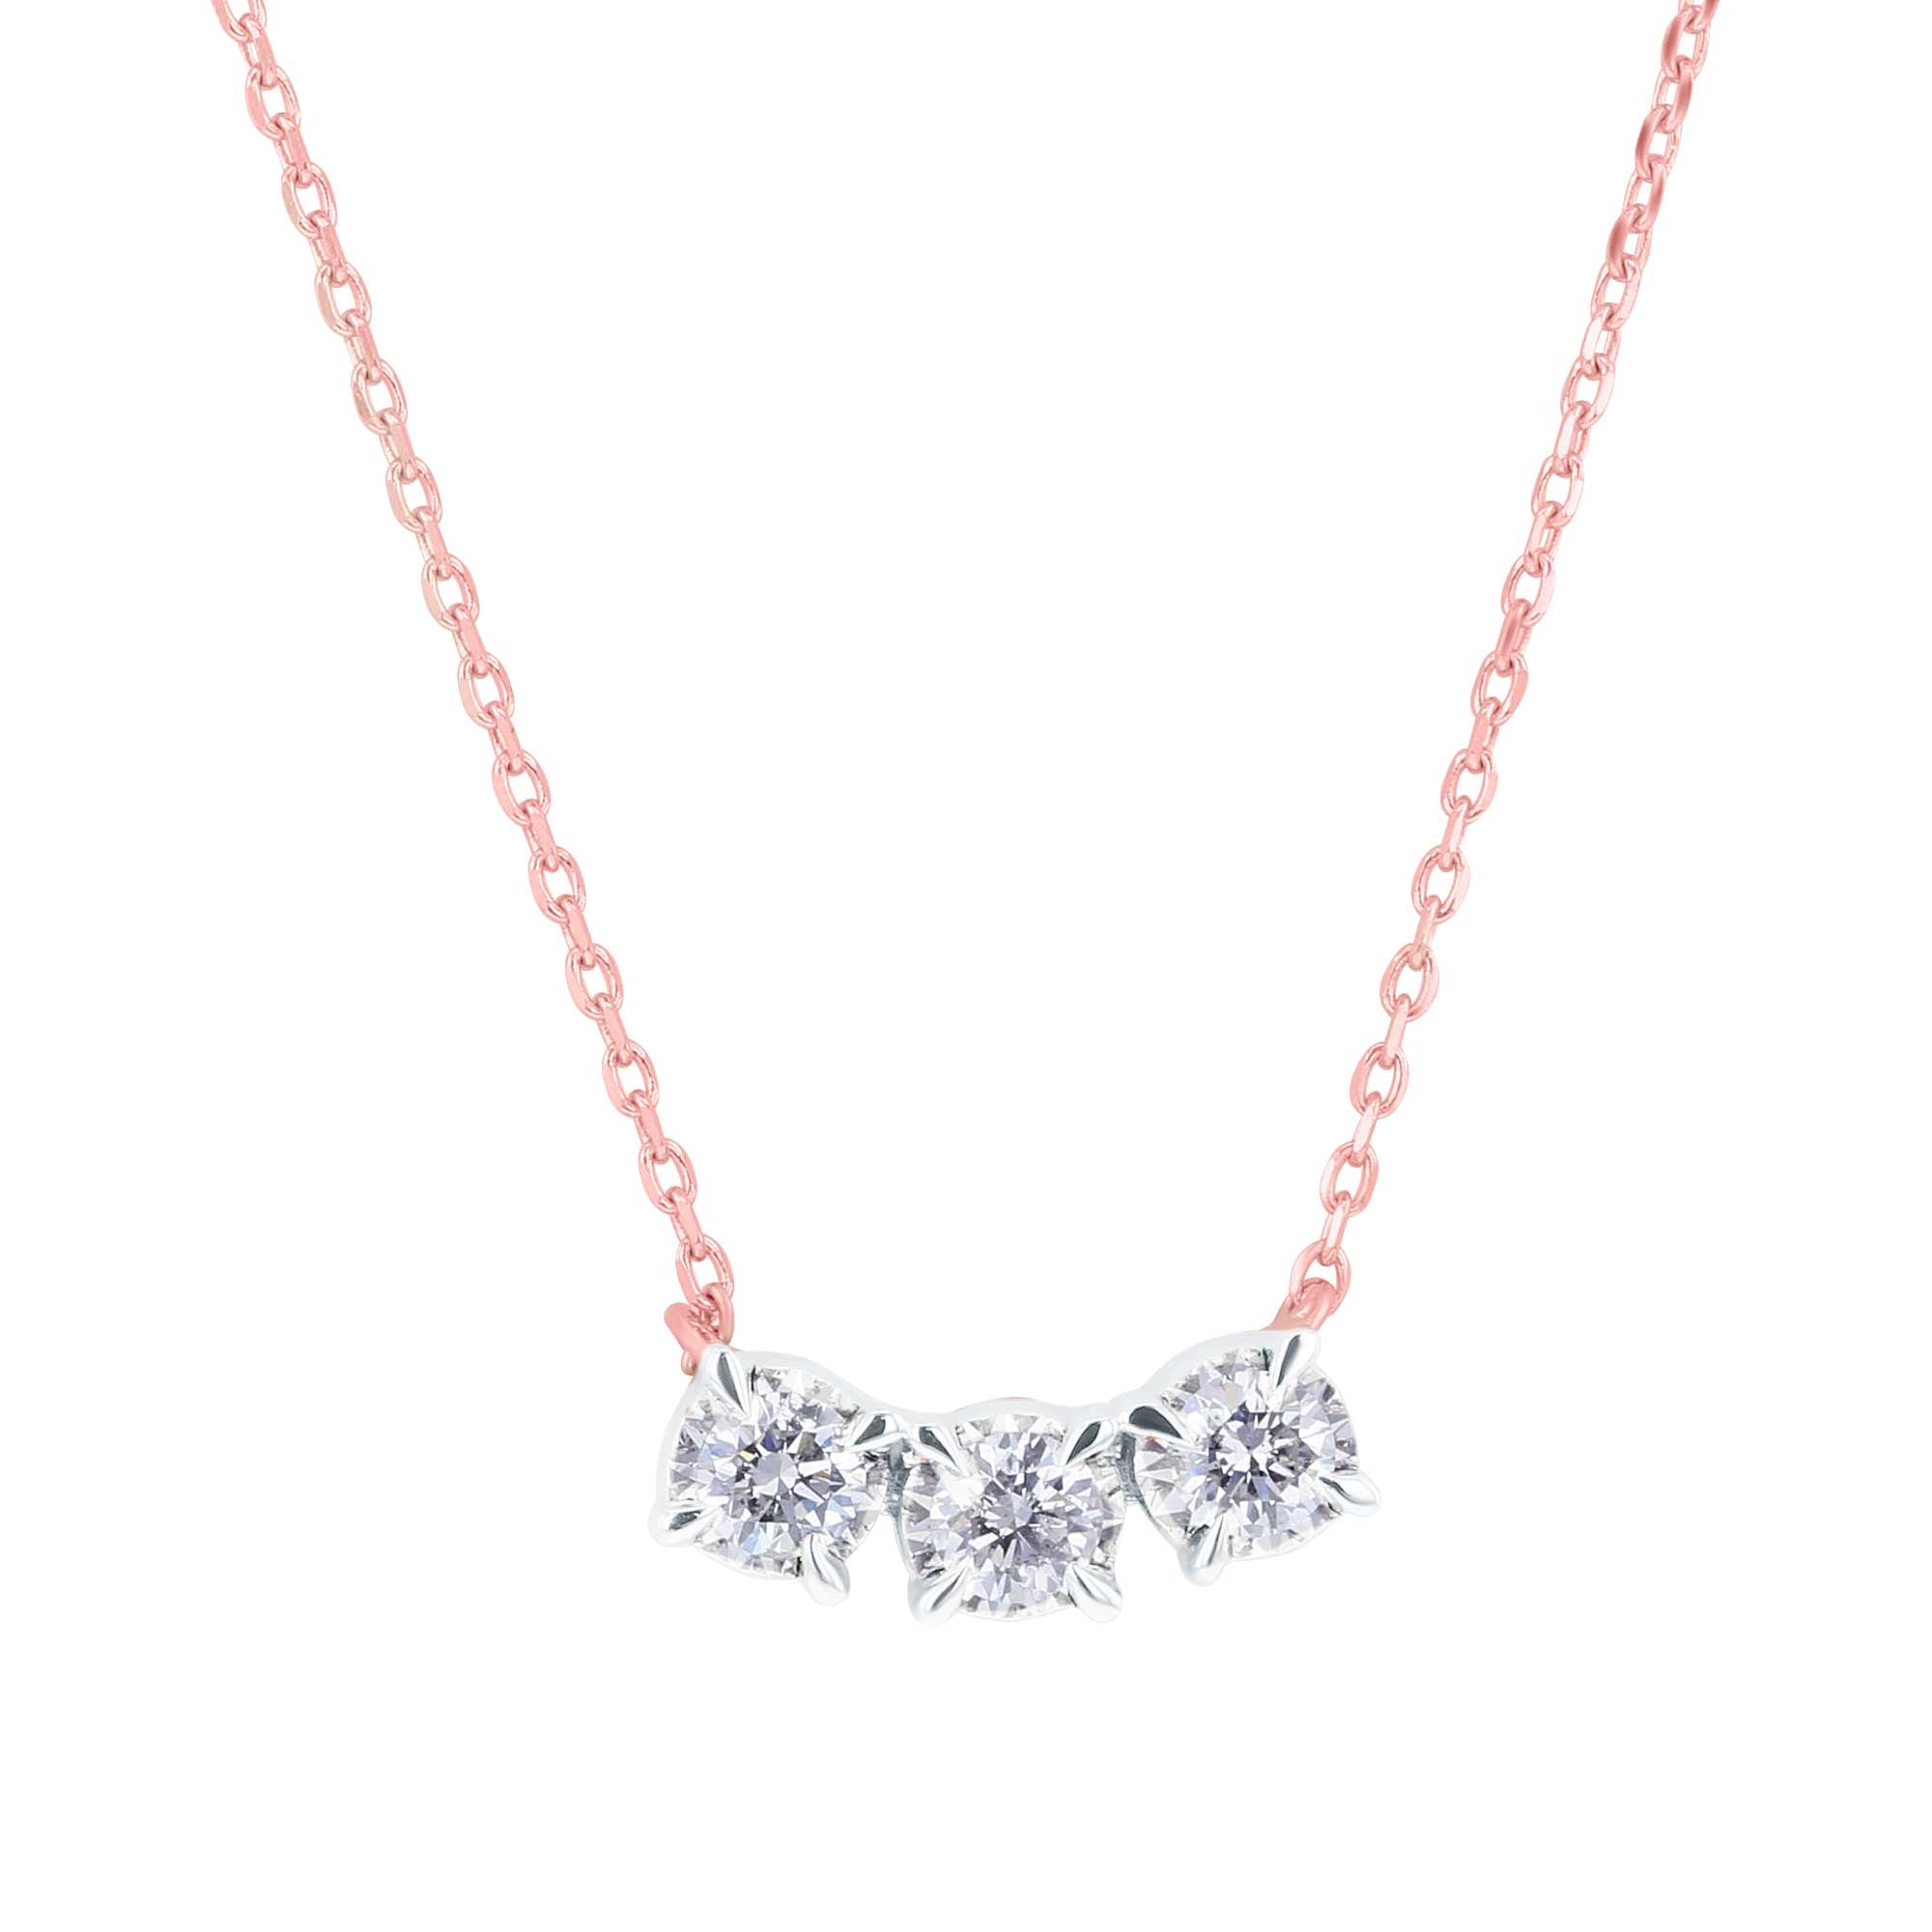 Nearly 1/4 Carat Diamond Solitaire Necklace In Sterling Silver For Women,  Teens and Girls! - Walmart.com